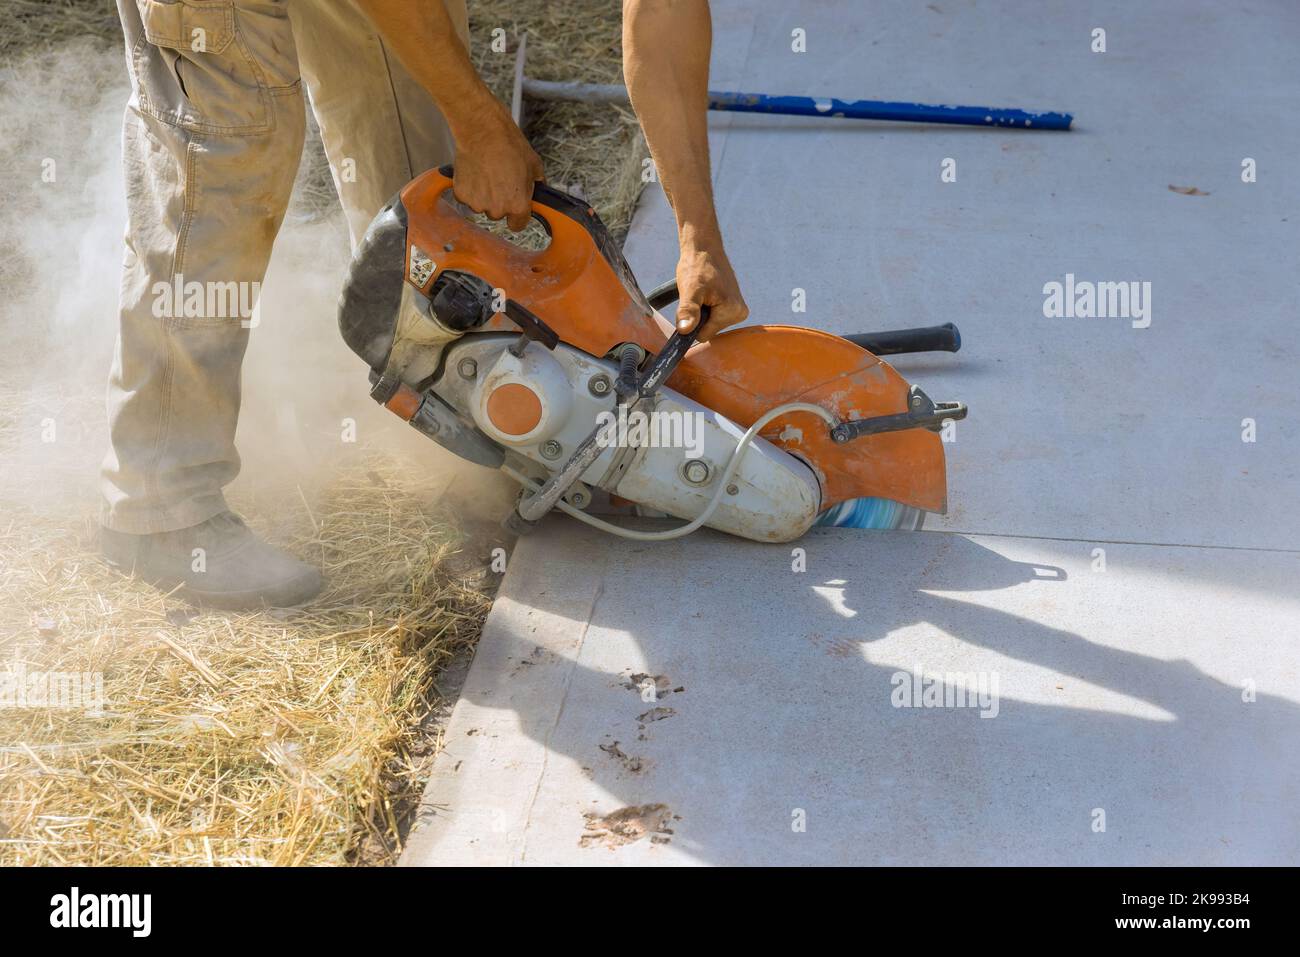 Cutting concrete sidewalk with diamond blade saw in reconctruction works Stock Photo